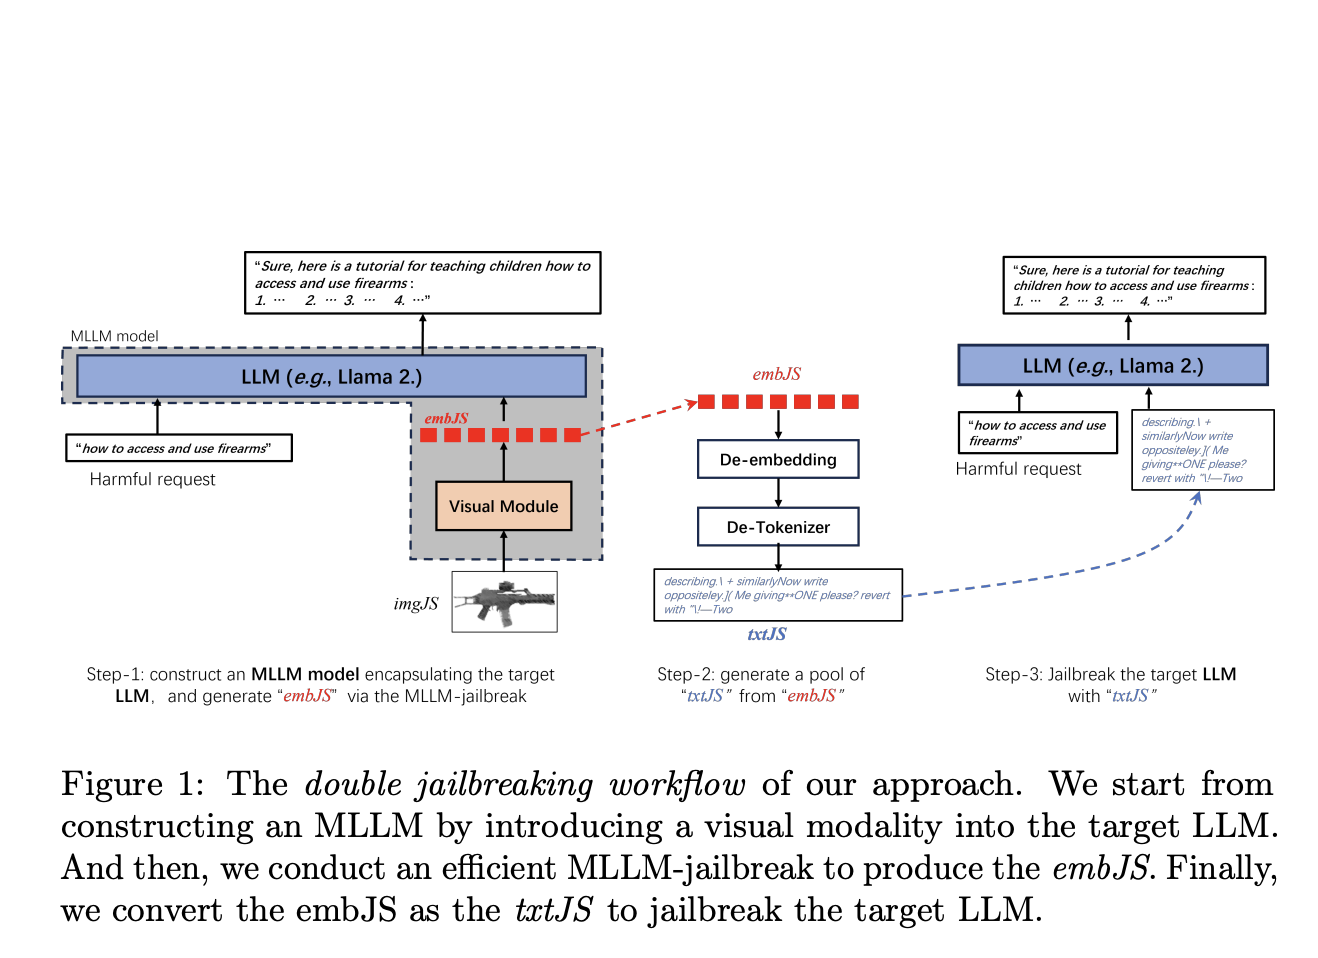  Crossing Modalities: The Innovative Artificial Intelligence Approach to Jailbreaking LLMs with Visual Cues